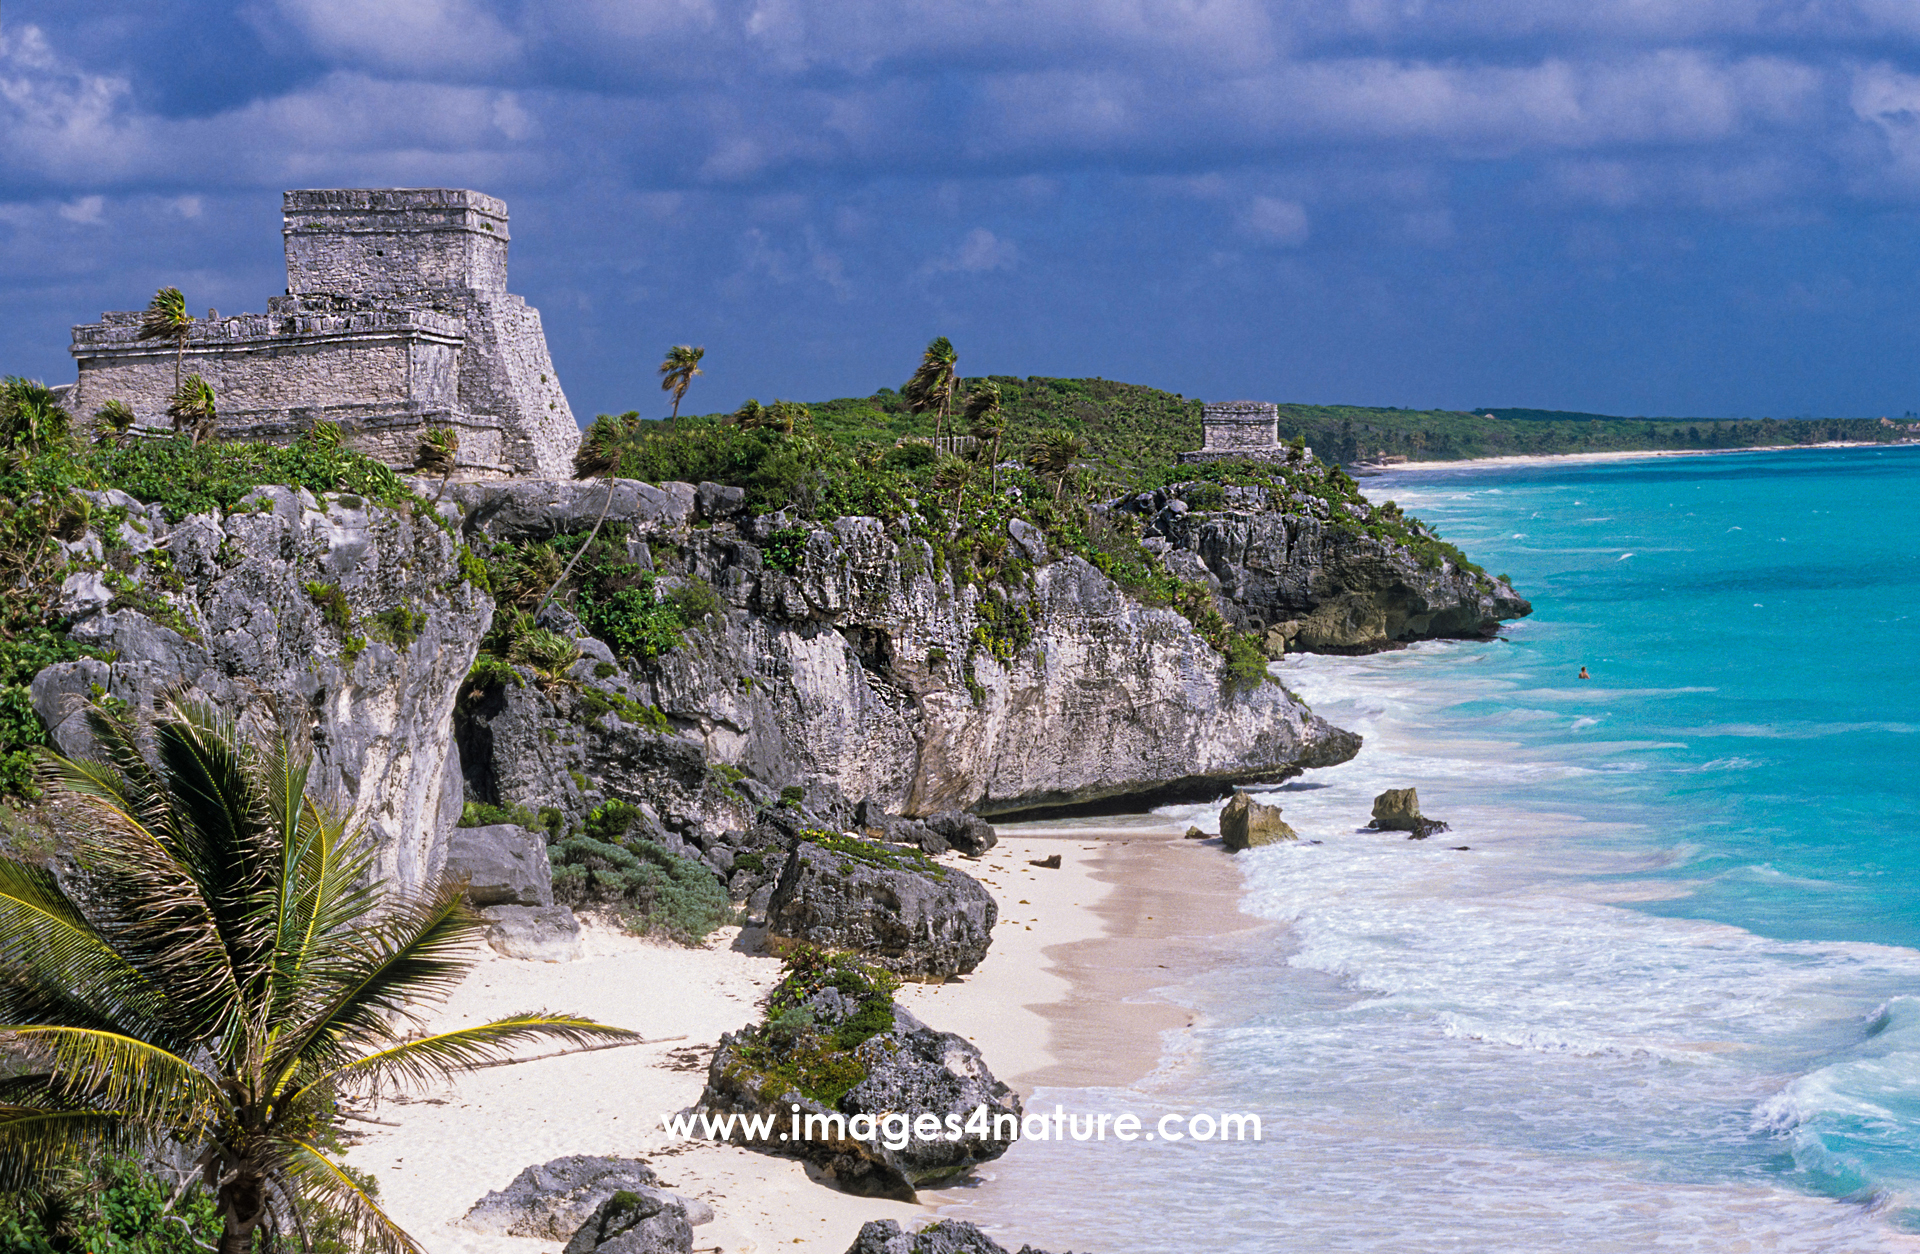 Scenic view of Tulum Mayan ruins and tropical beaches